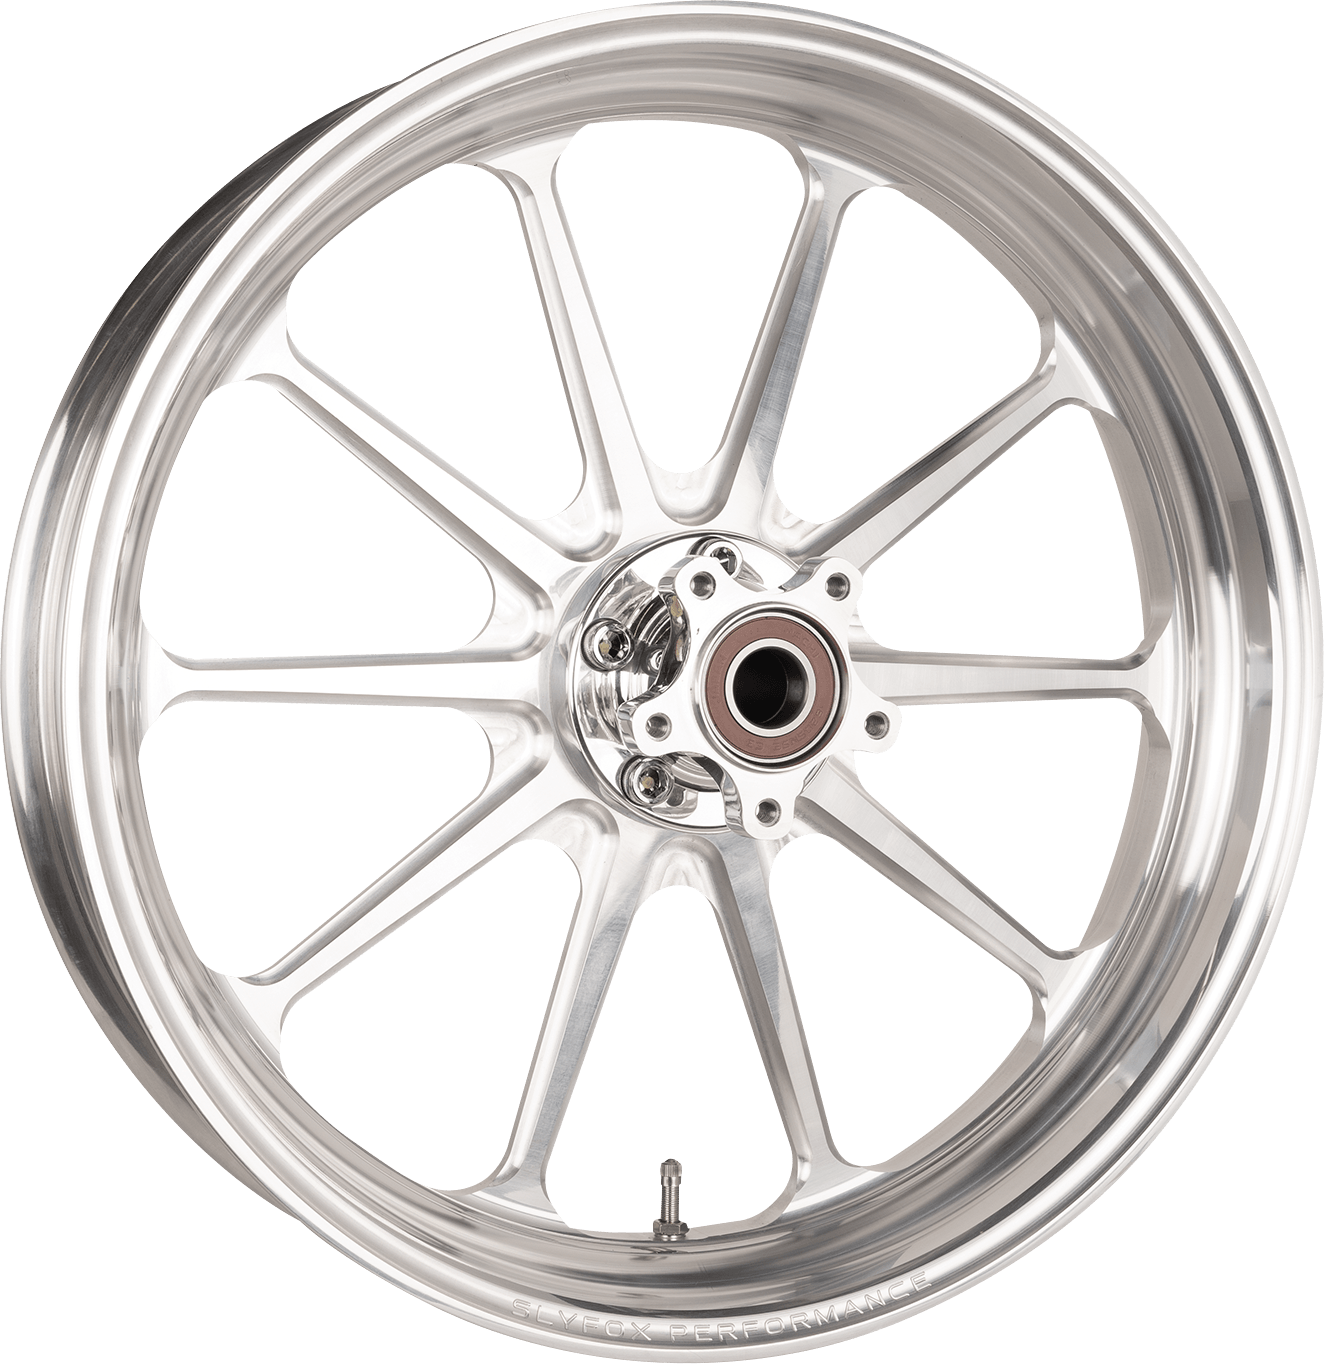 SLYFOX-17"x3.5" Front Track Pro Wheels / '08-Up Bagger-Wheels-MetalCore Harley Supply